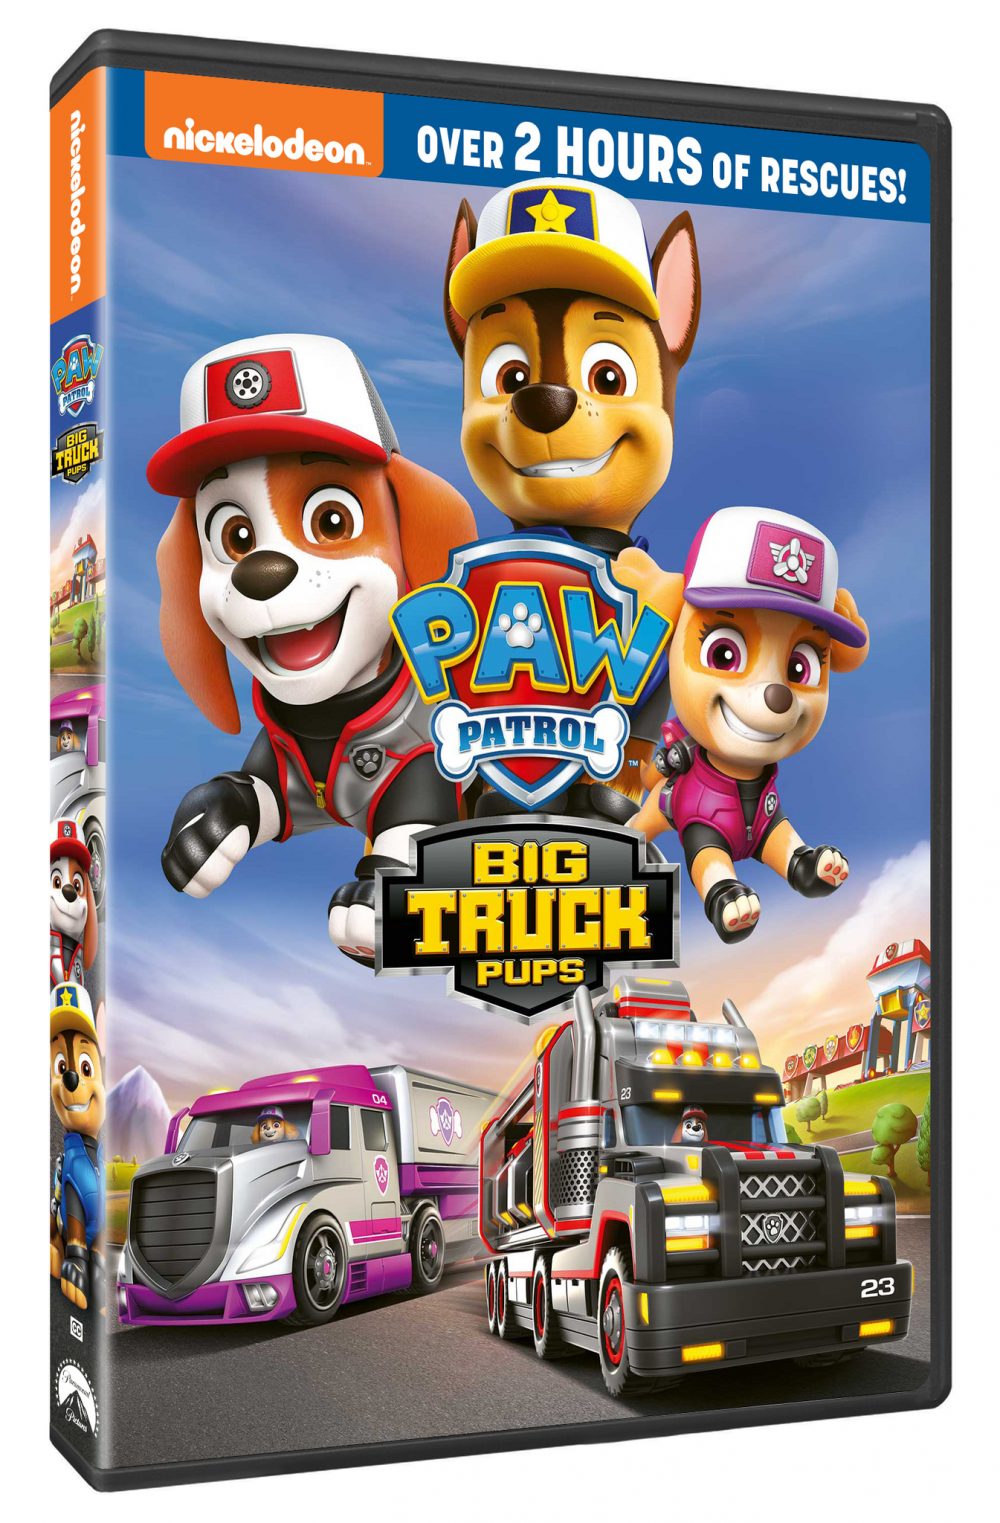 PAW Patrol: Big Truck Pups is coming to DVD on December 6!